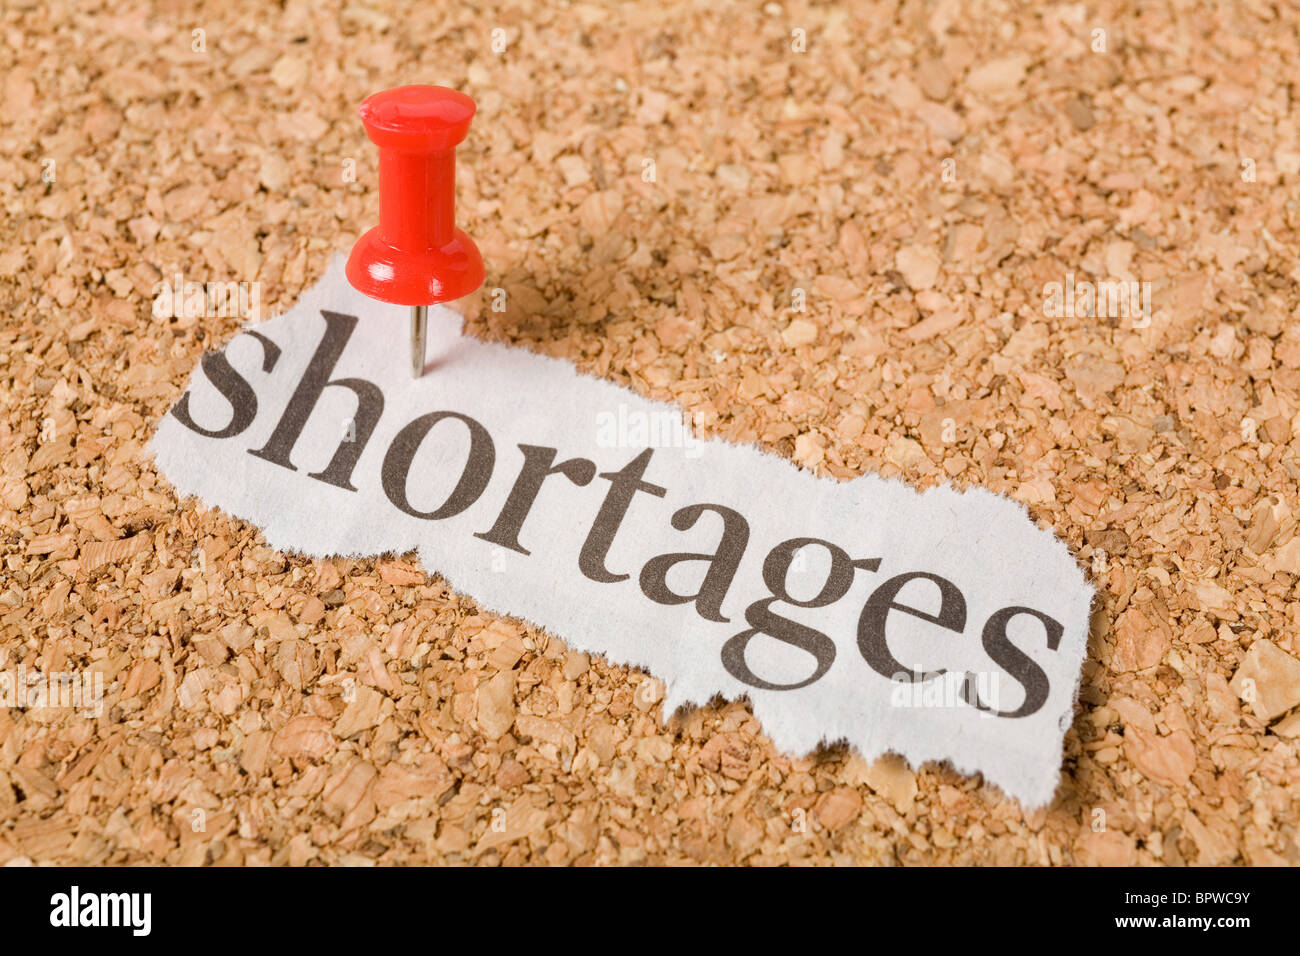 Headline shortages, concept of shortages Stock Photo